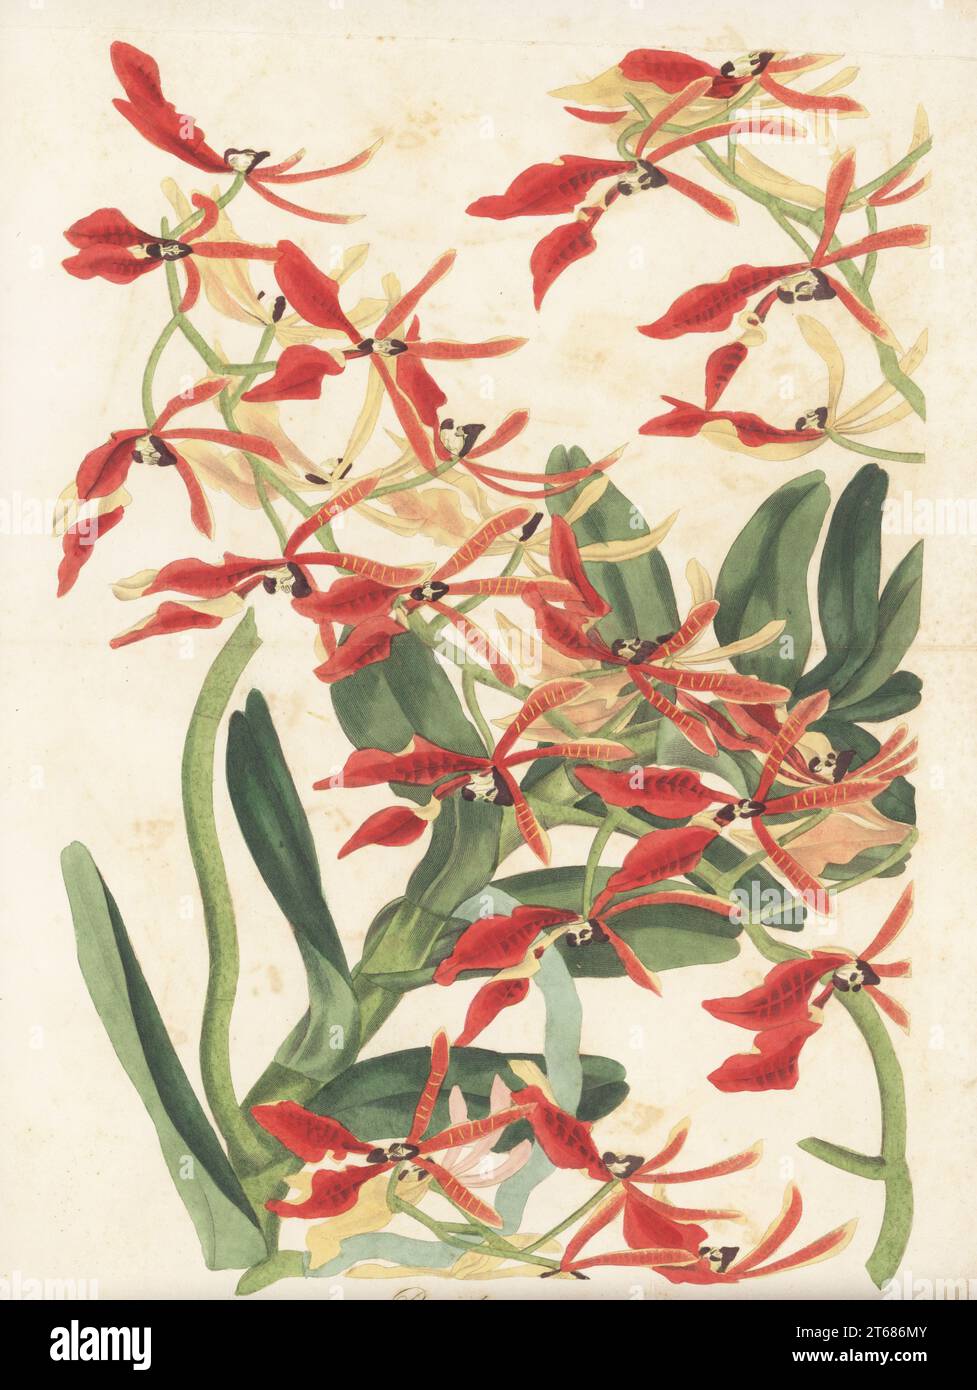 Renanthera coccinea orchid. Chinese scarlet-flowered air plant, Renanthera coccinea. Native from China to Indochina, found growing on trees in the woods in Cochin China. Handcoloured engraving by Frederick William Smith after a botanical illustration by Samuel Holden from Joseph Paxtons Magazine of Botany, and Register of Flowering Plants, Volume 4, Orr and Smith, London, 1837. Stock Photo